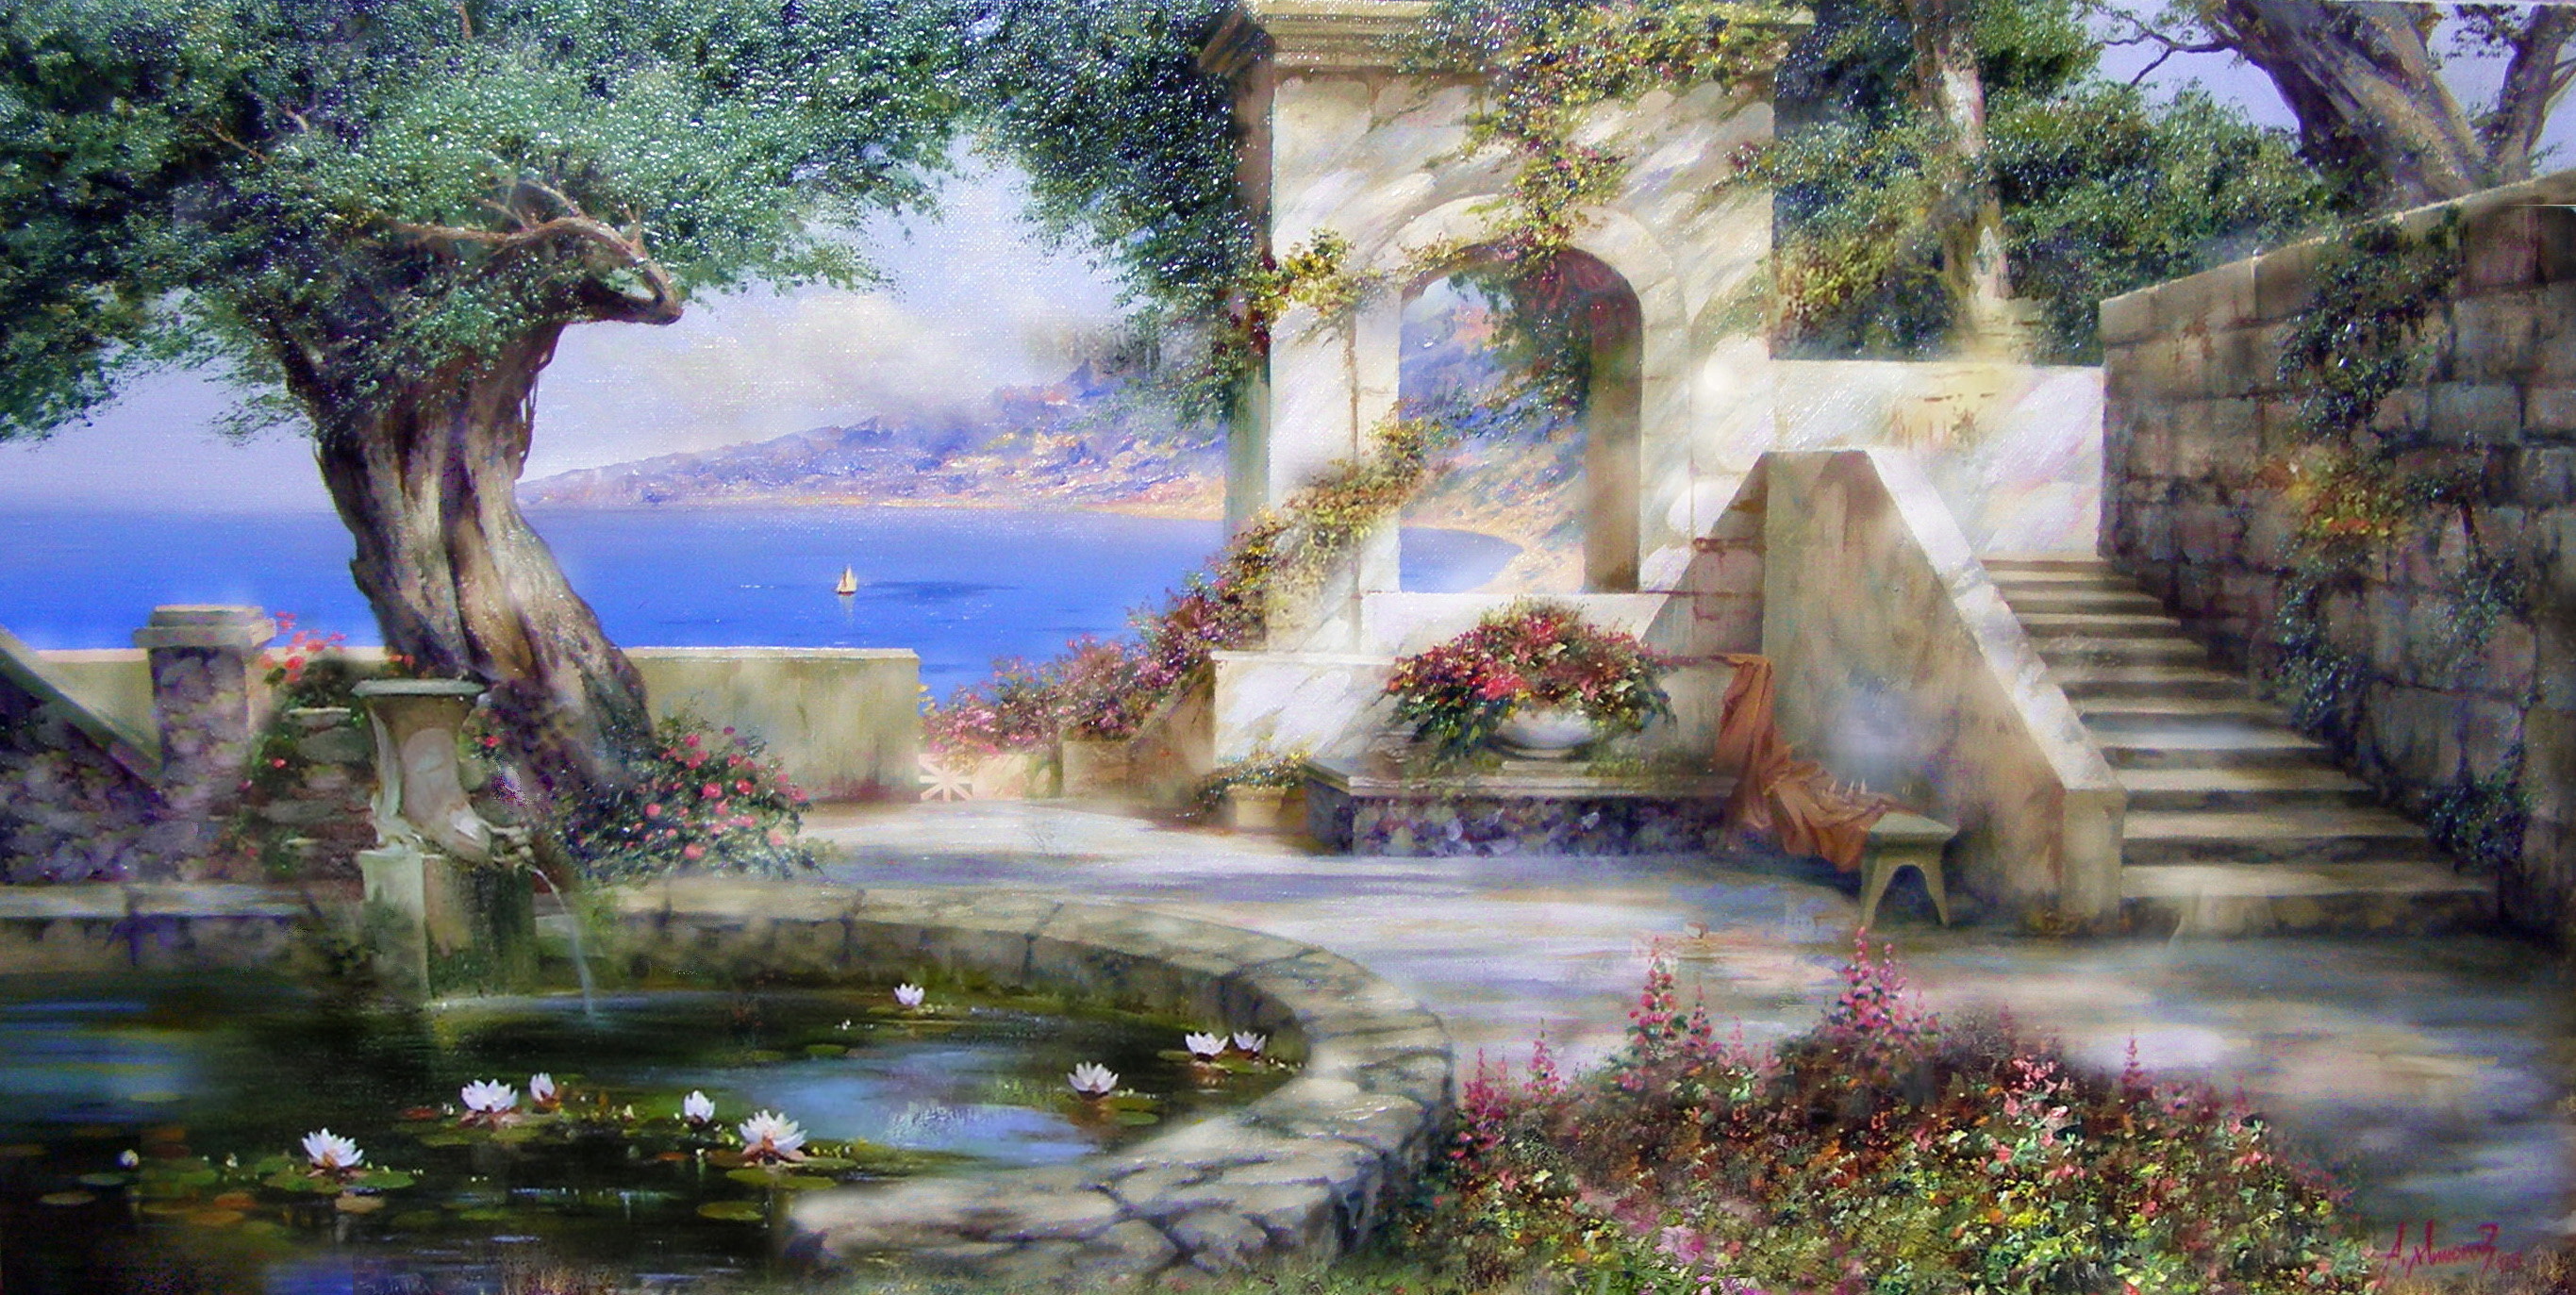 Artistic Place HD Wallpaper | Background Image